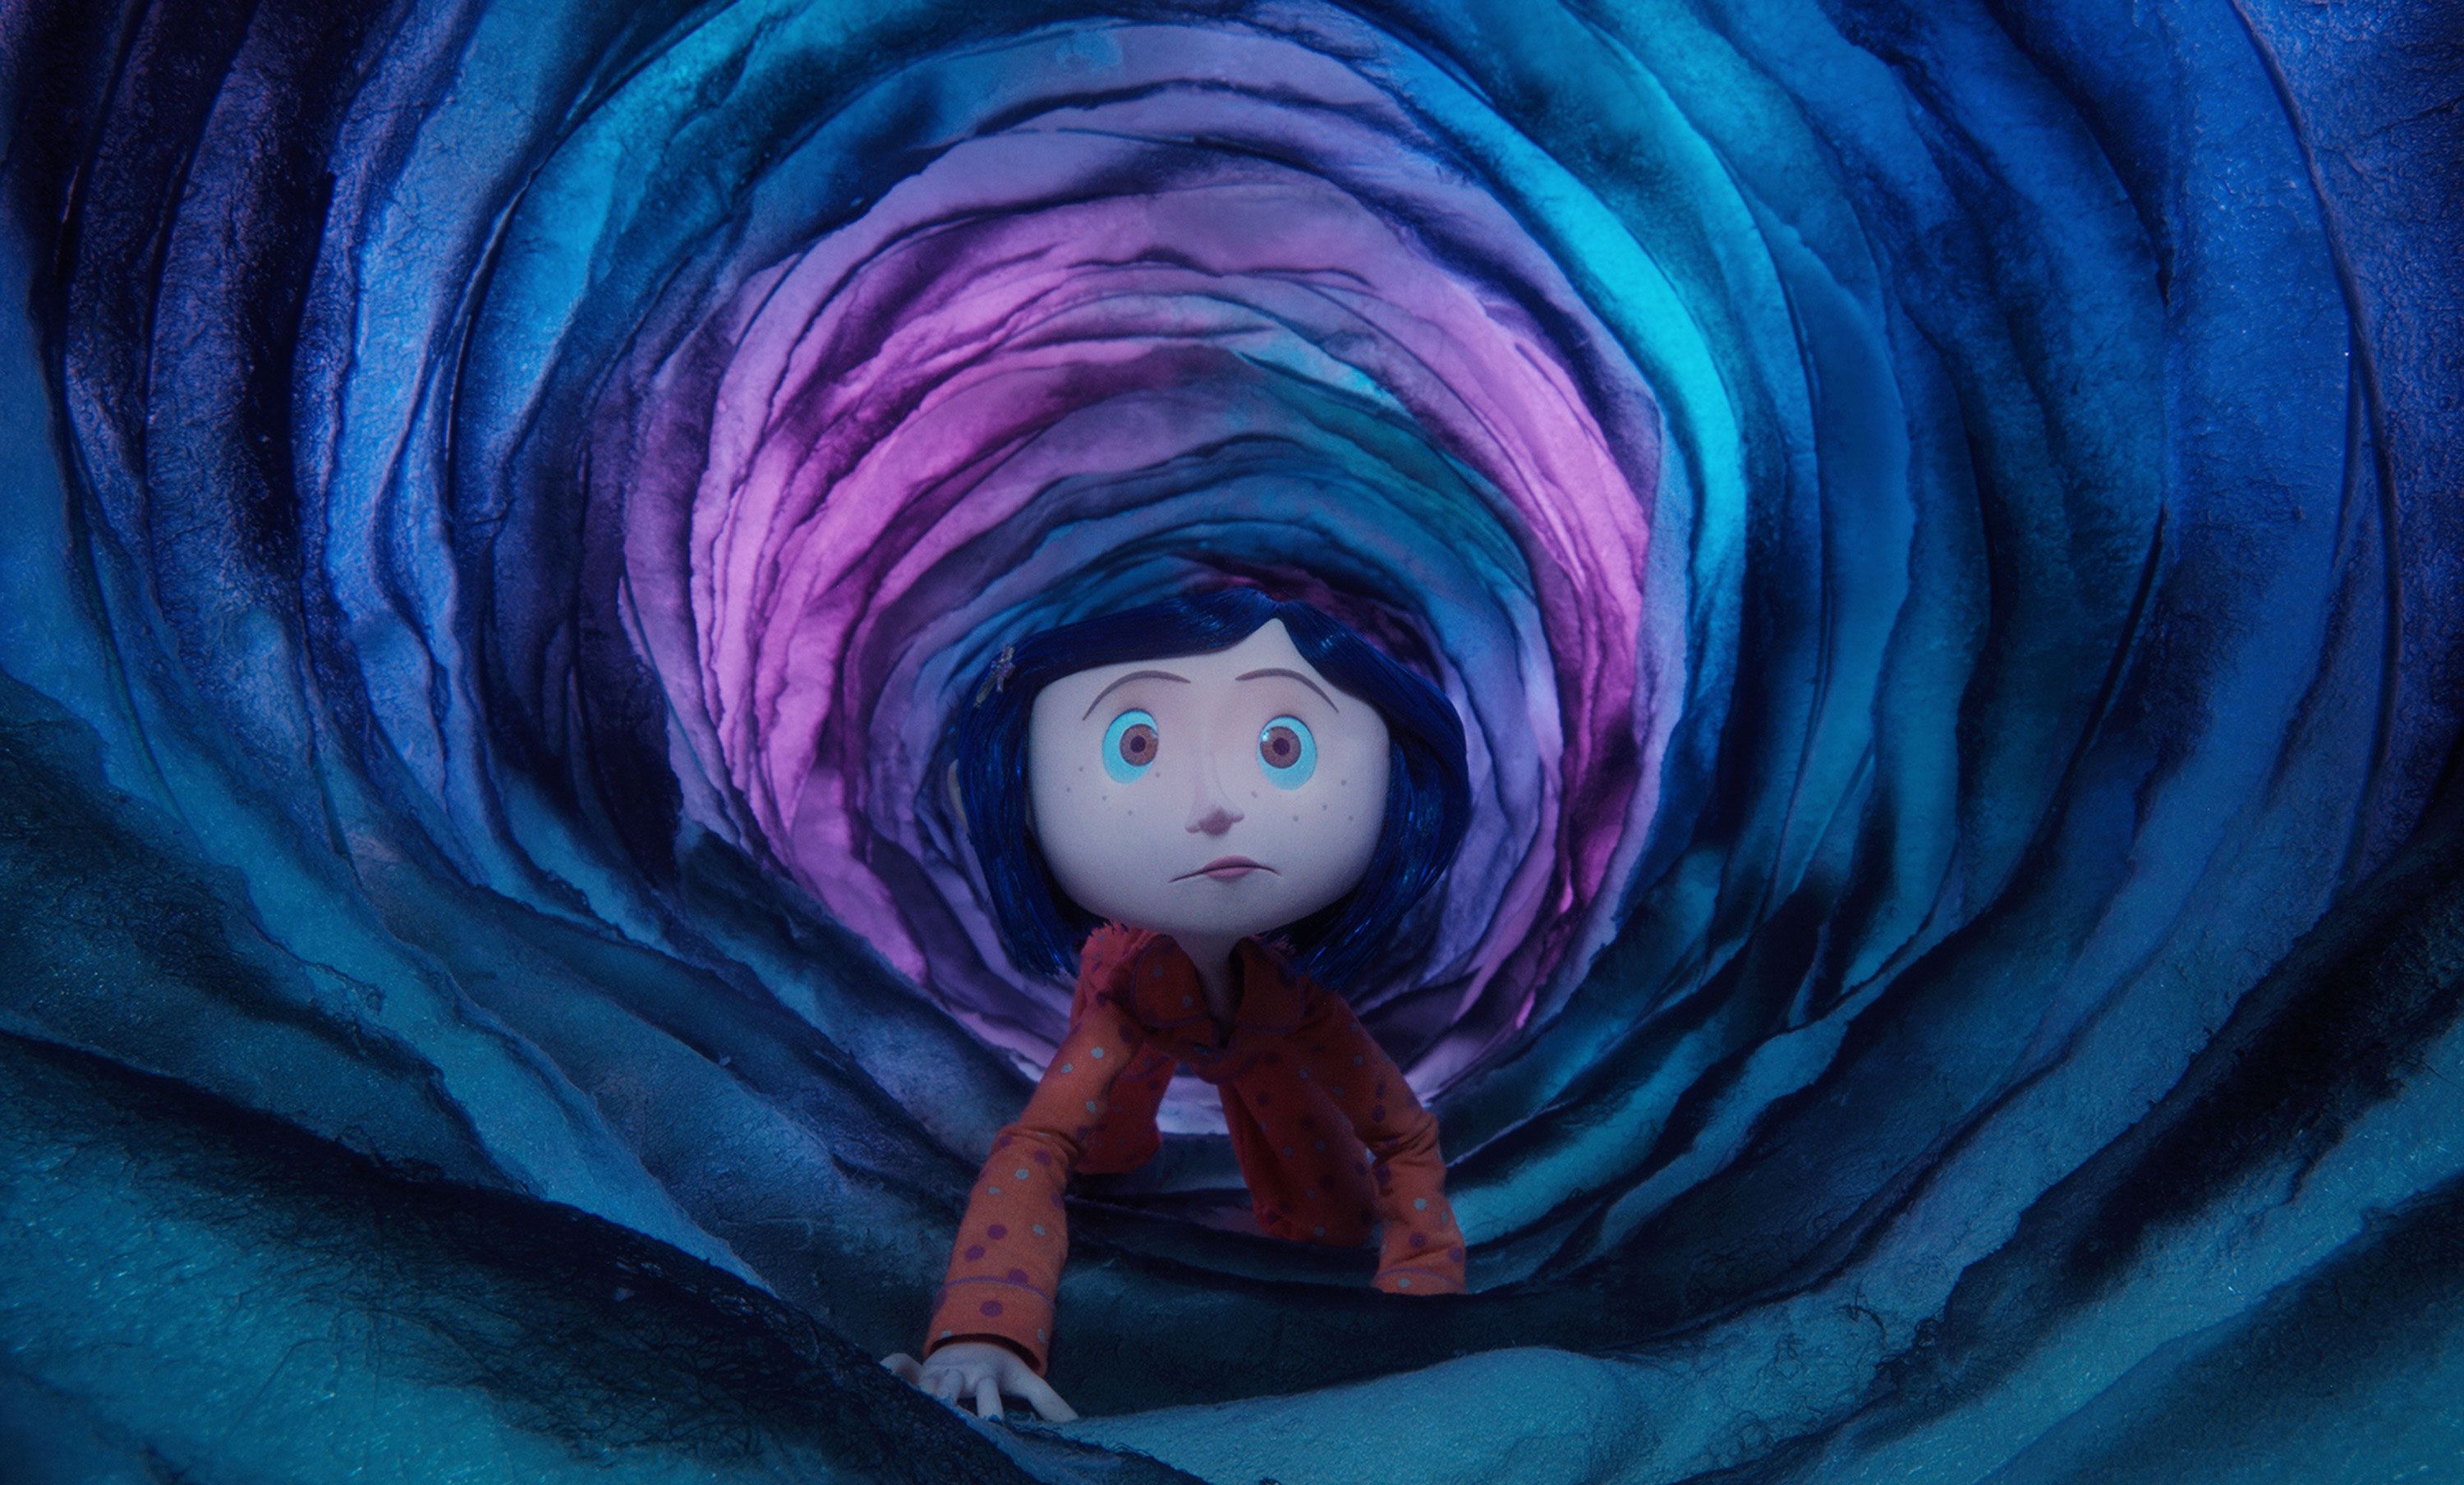 Focus Features Signs Two-Picture Distribution Deal with CORALINE Studio